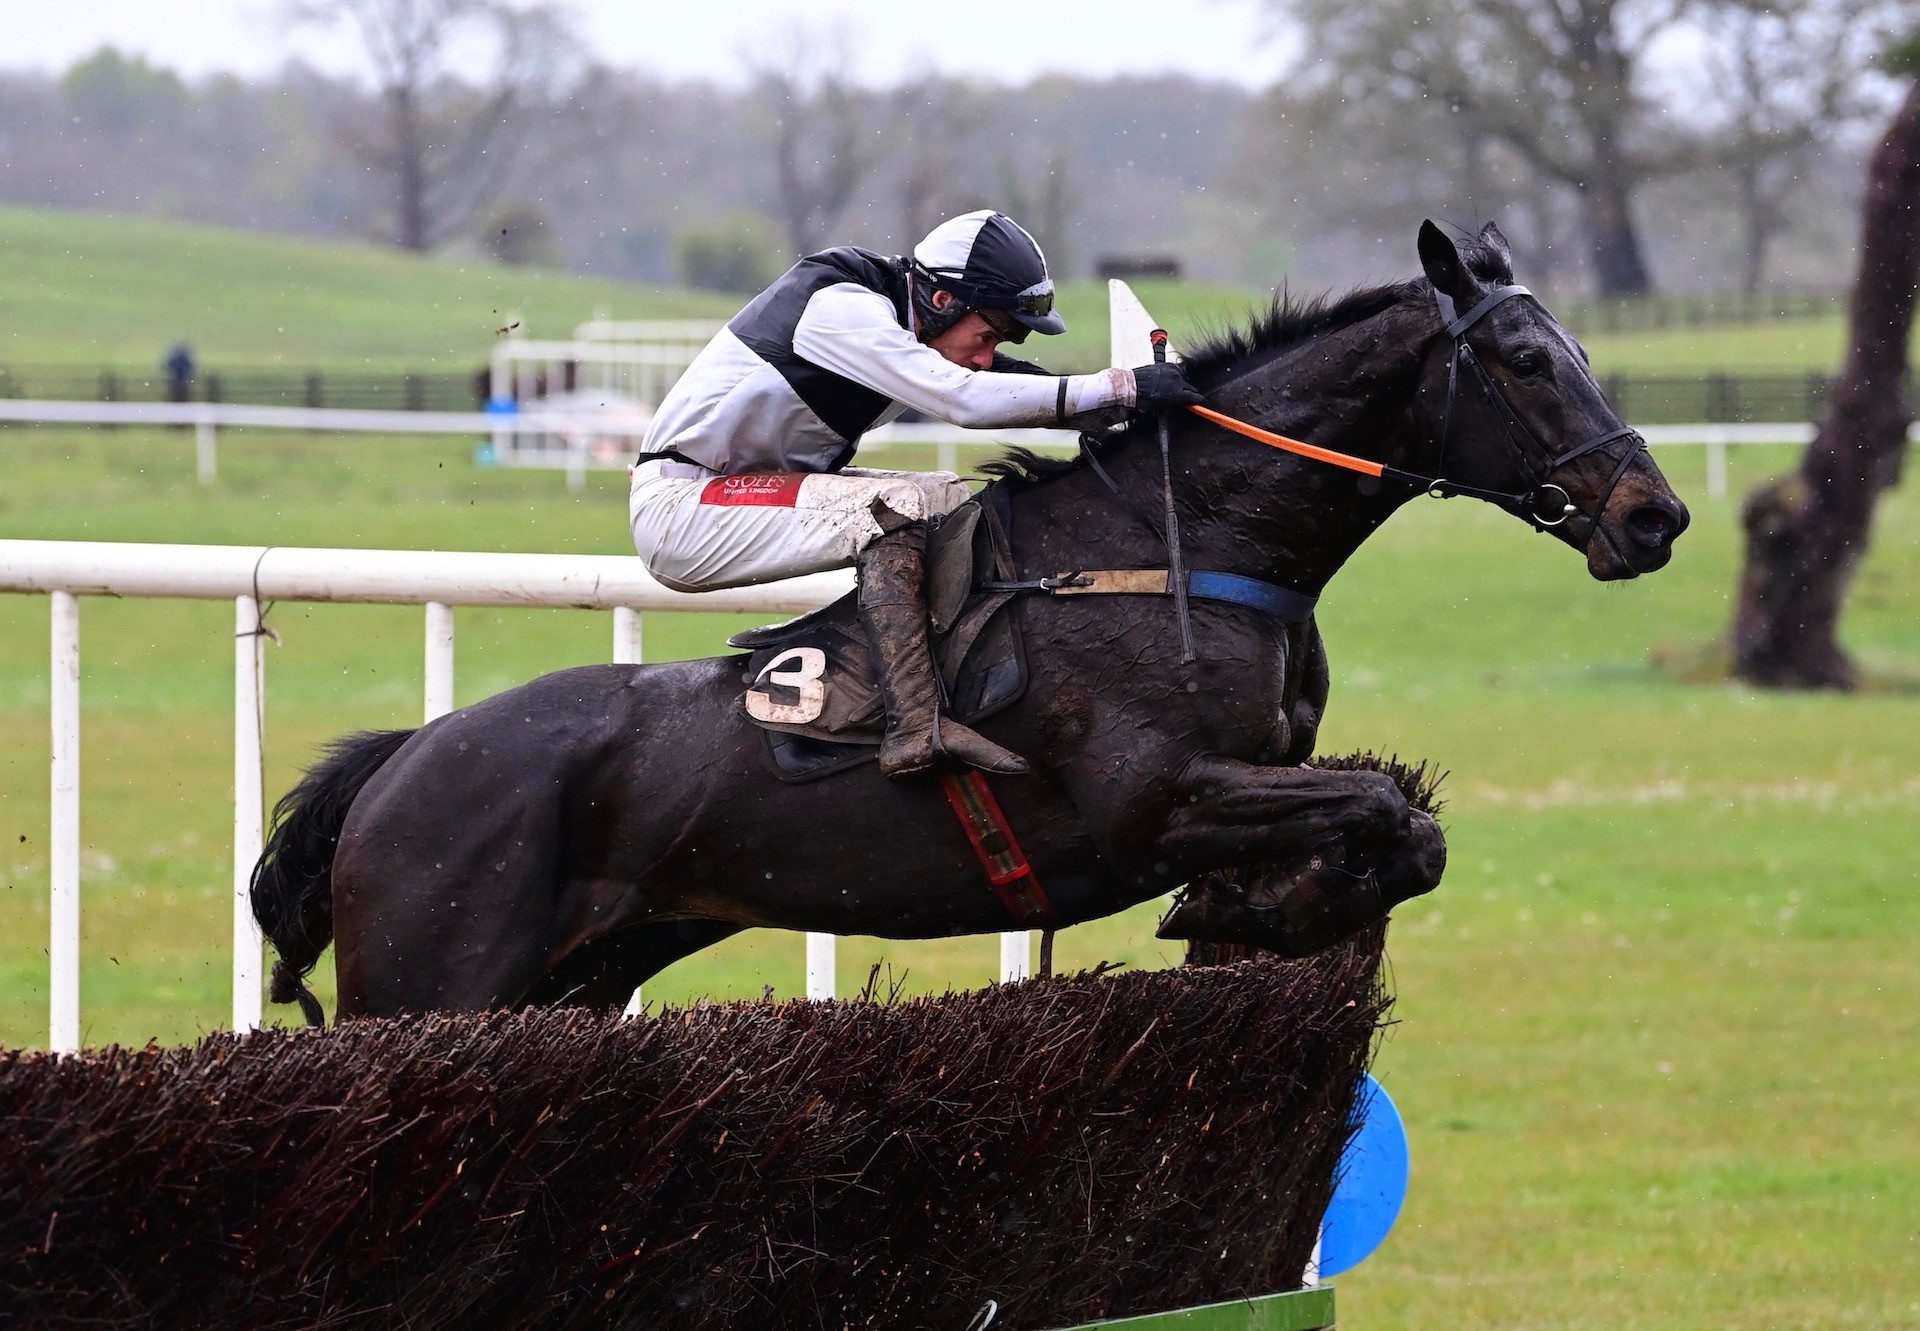 Kerryhill (Soldier Of Fortune) winning at Necarne